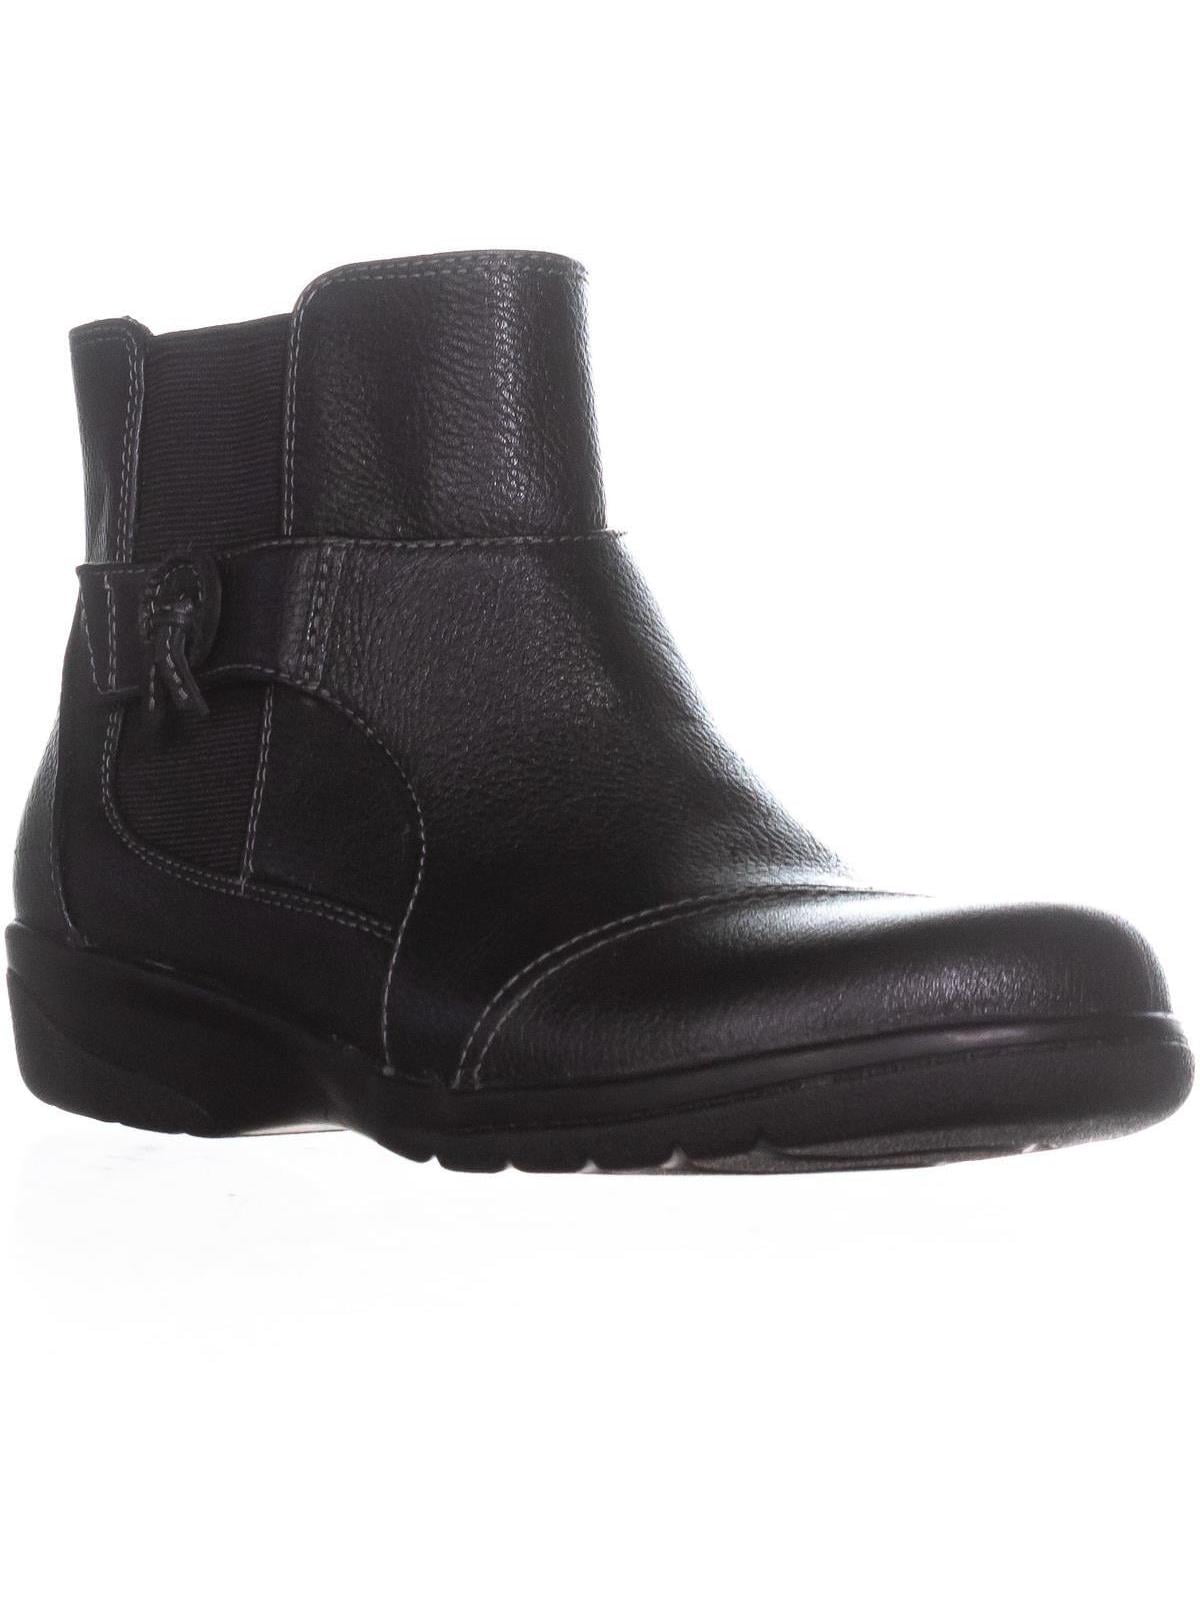 clarks ankle boots canada